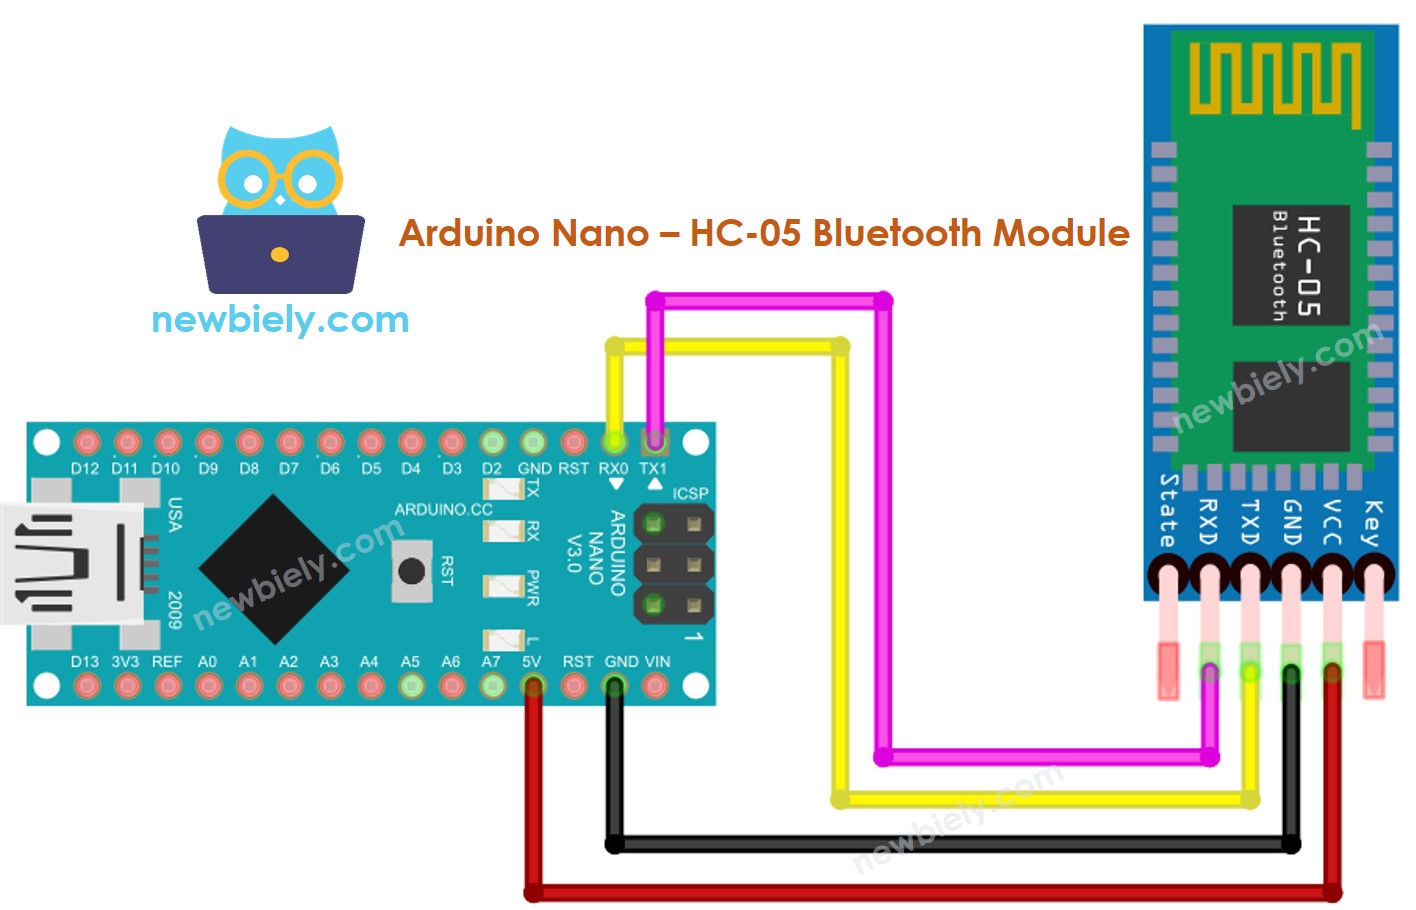 The wiring diagram between Arduino Nano and Bluetooth